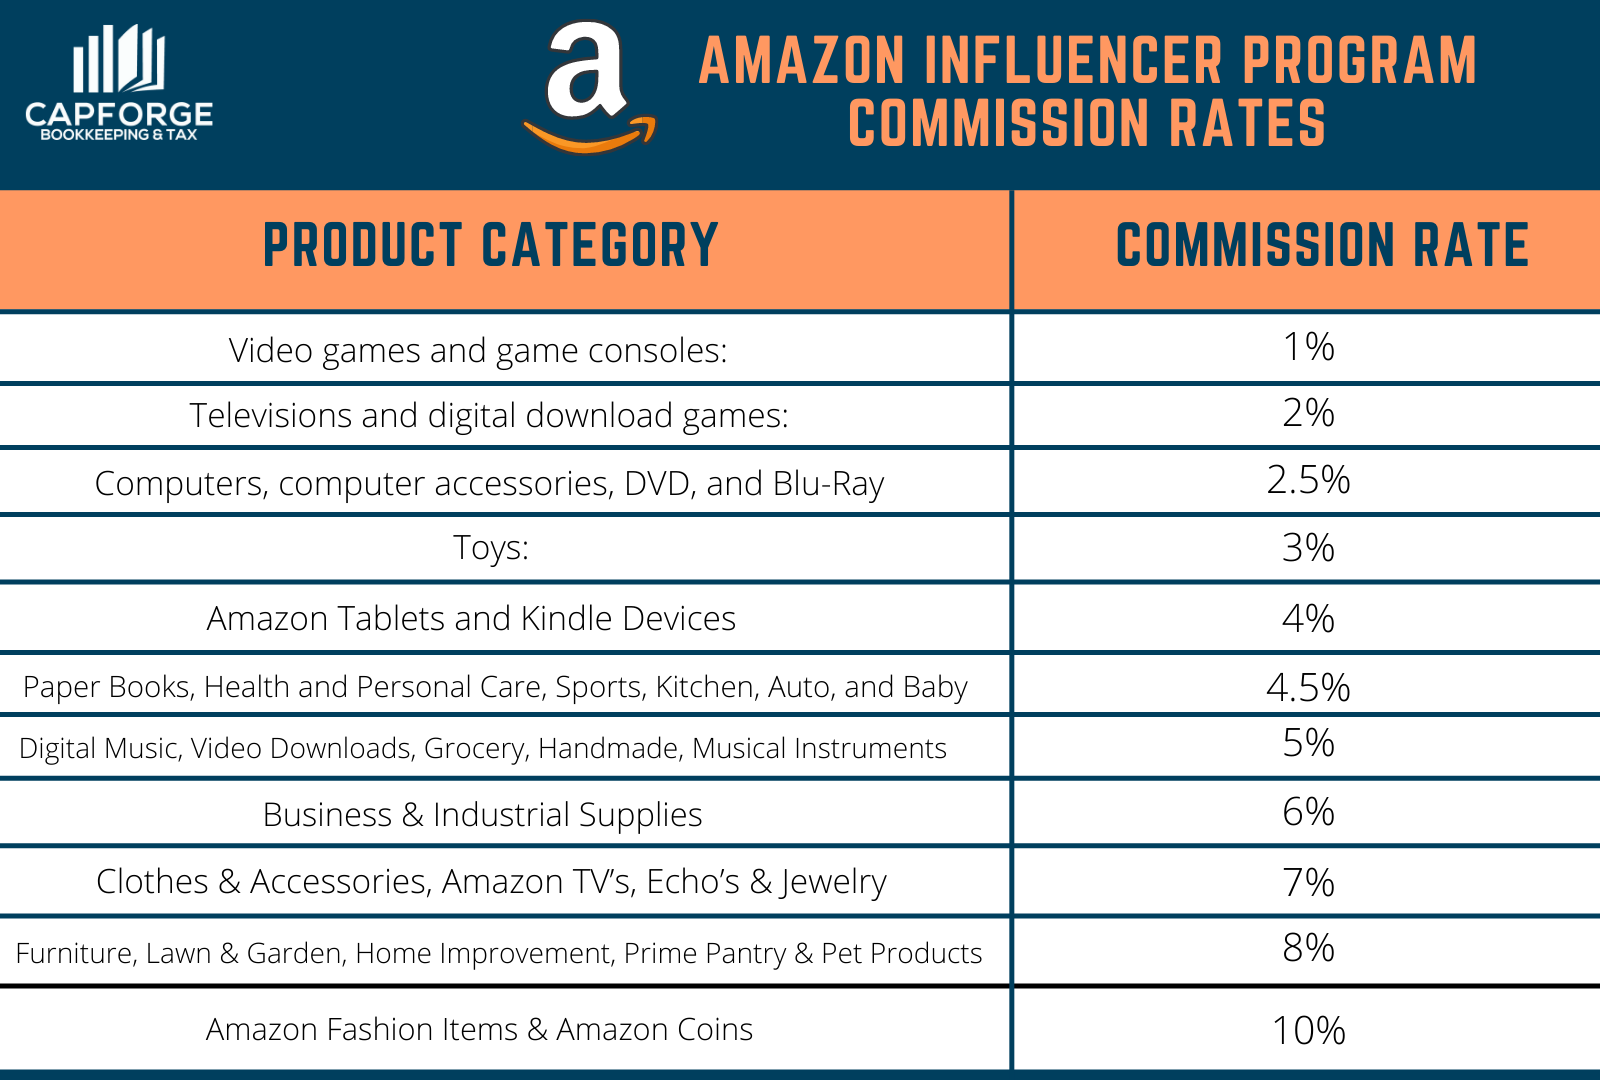 How Much Do Amazon Influencers Make?